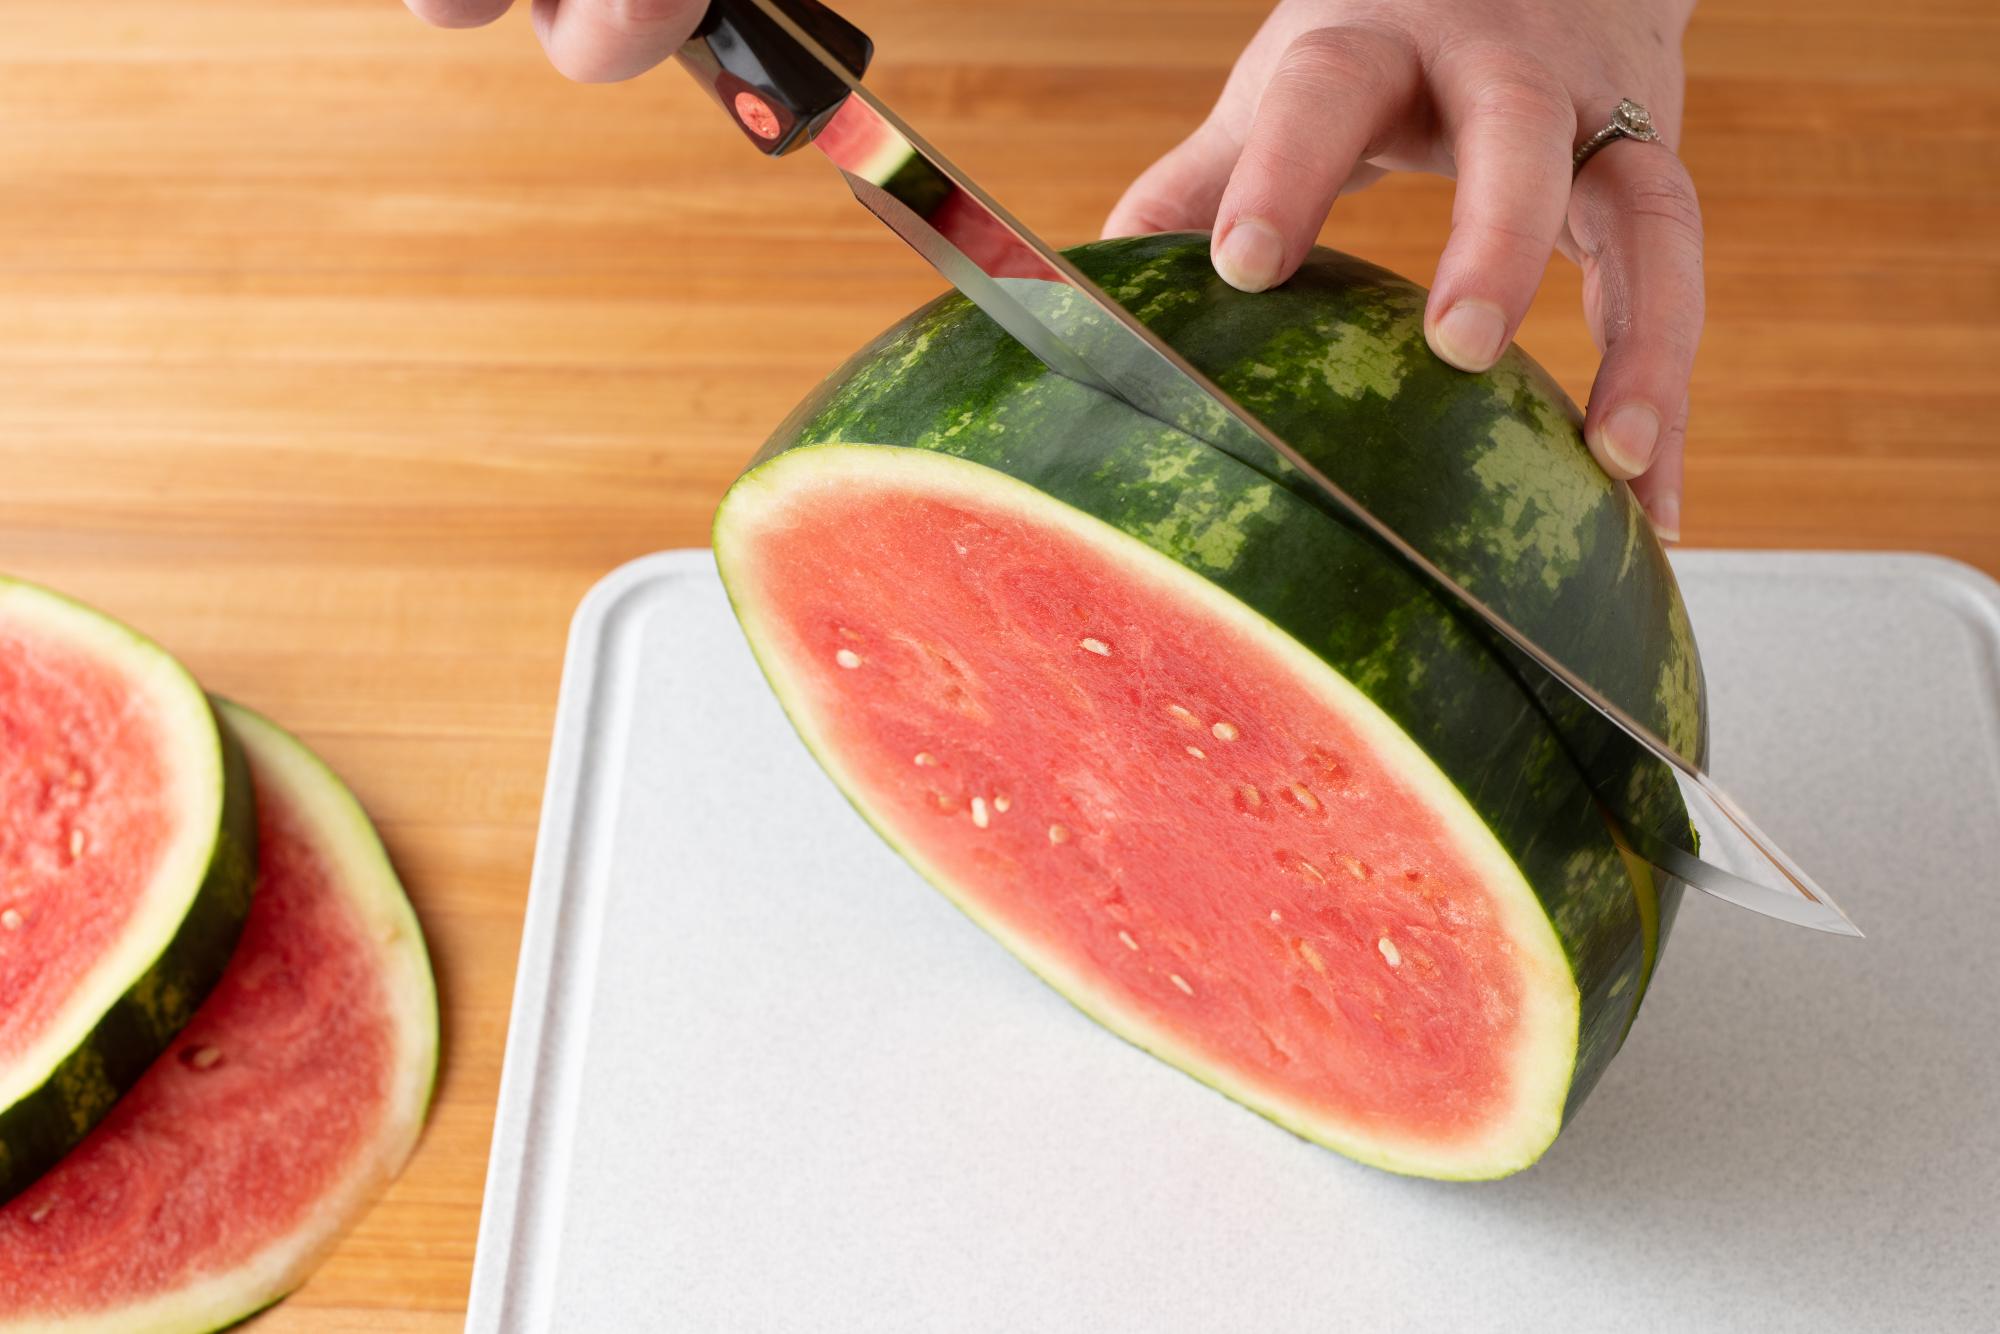 Slicing watermelon with a Butcher Knife.